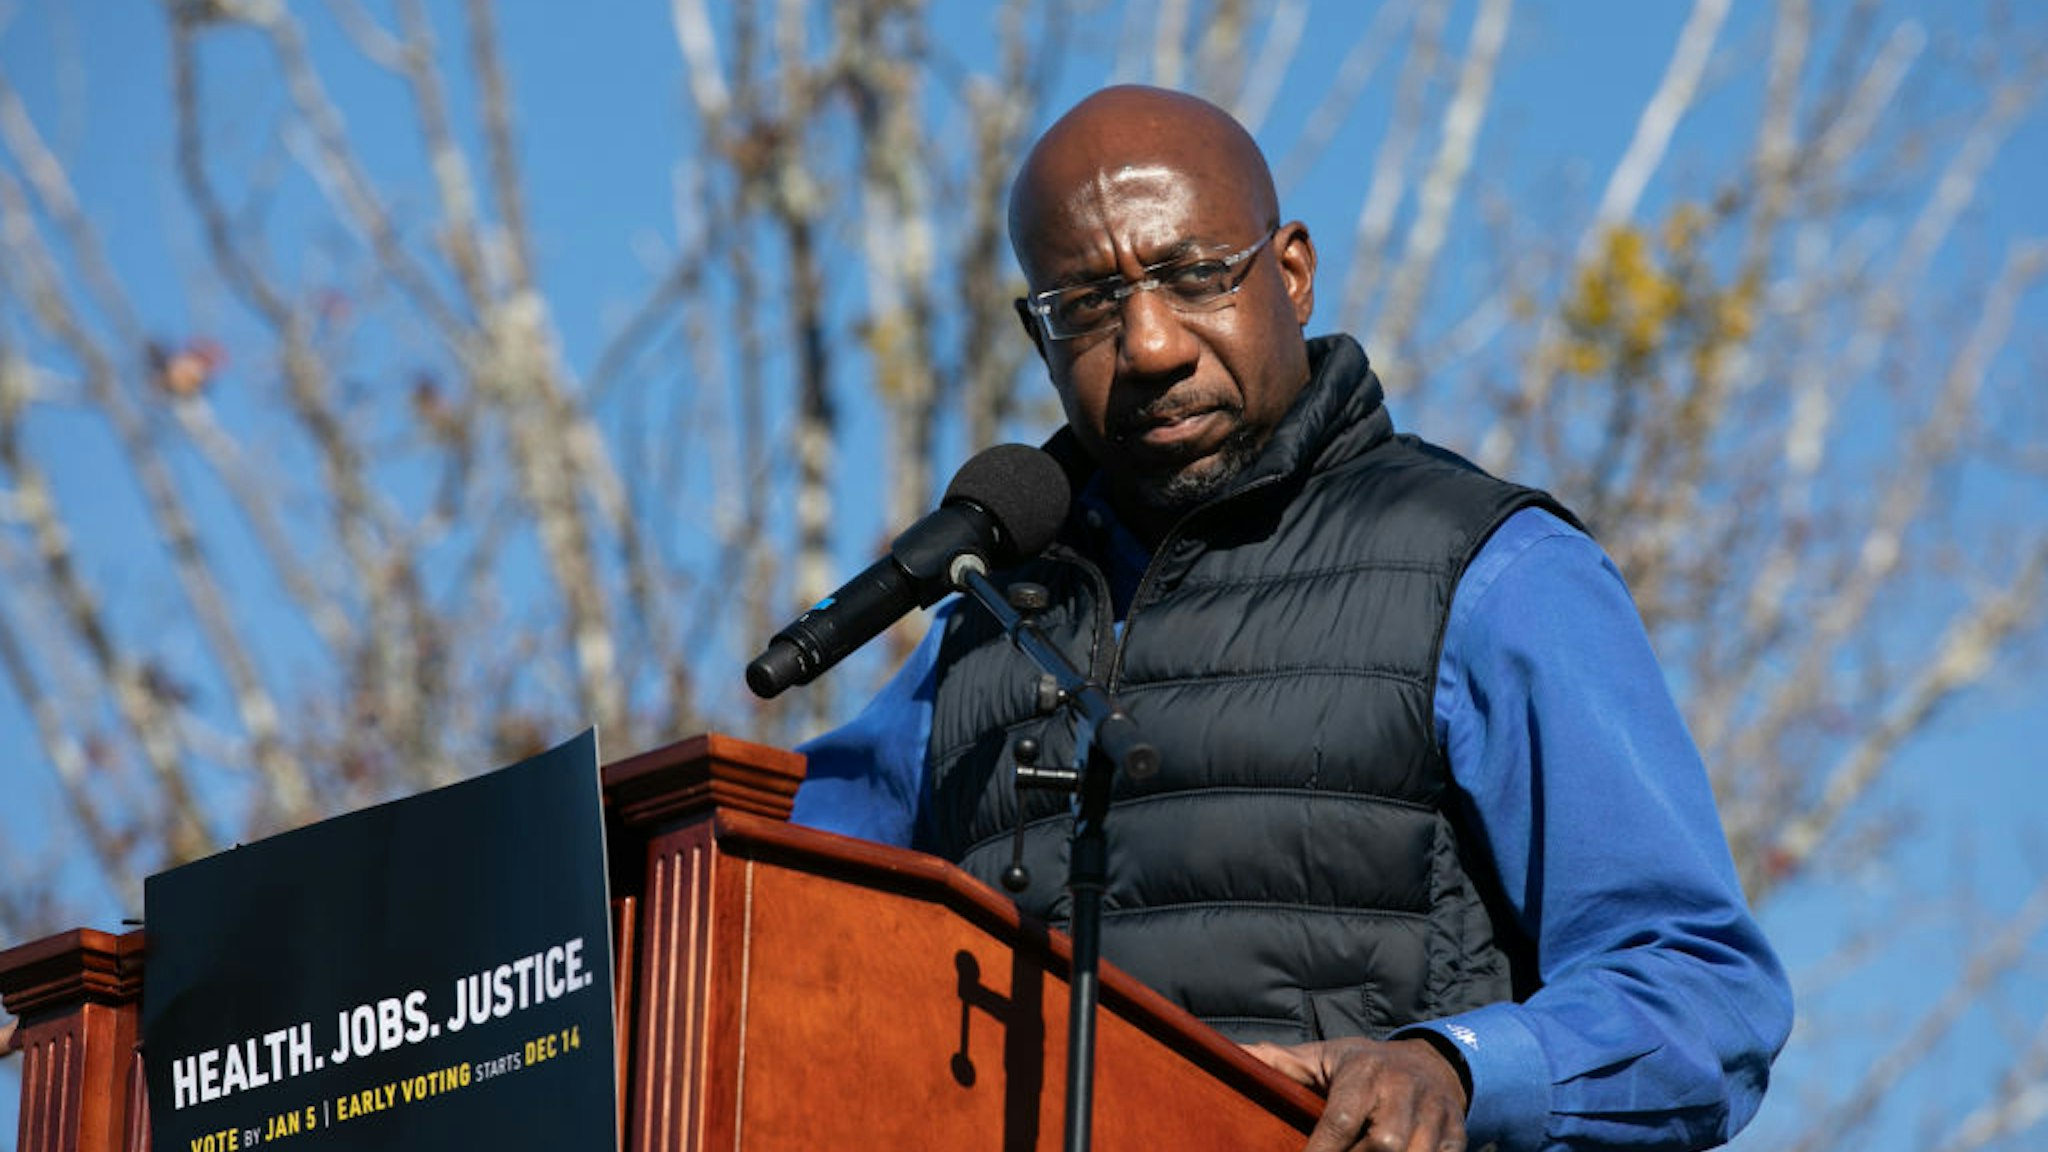 Democratic U.S. Senate candidate Raphael Warnock speaks to the crowd during an outdoor drive-in rally on December 5, 2020 in Conyers, Georgia.